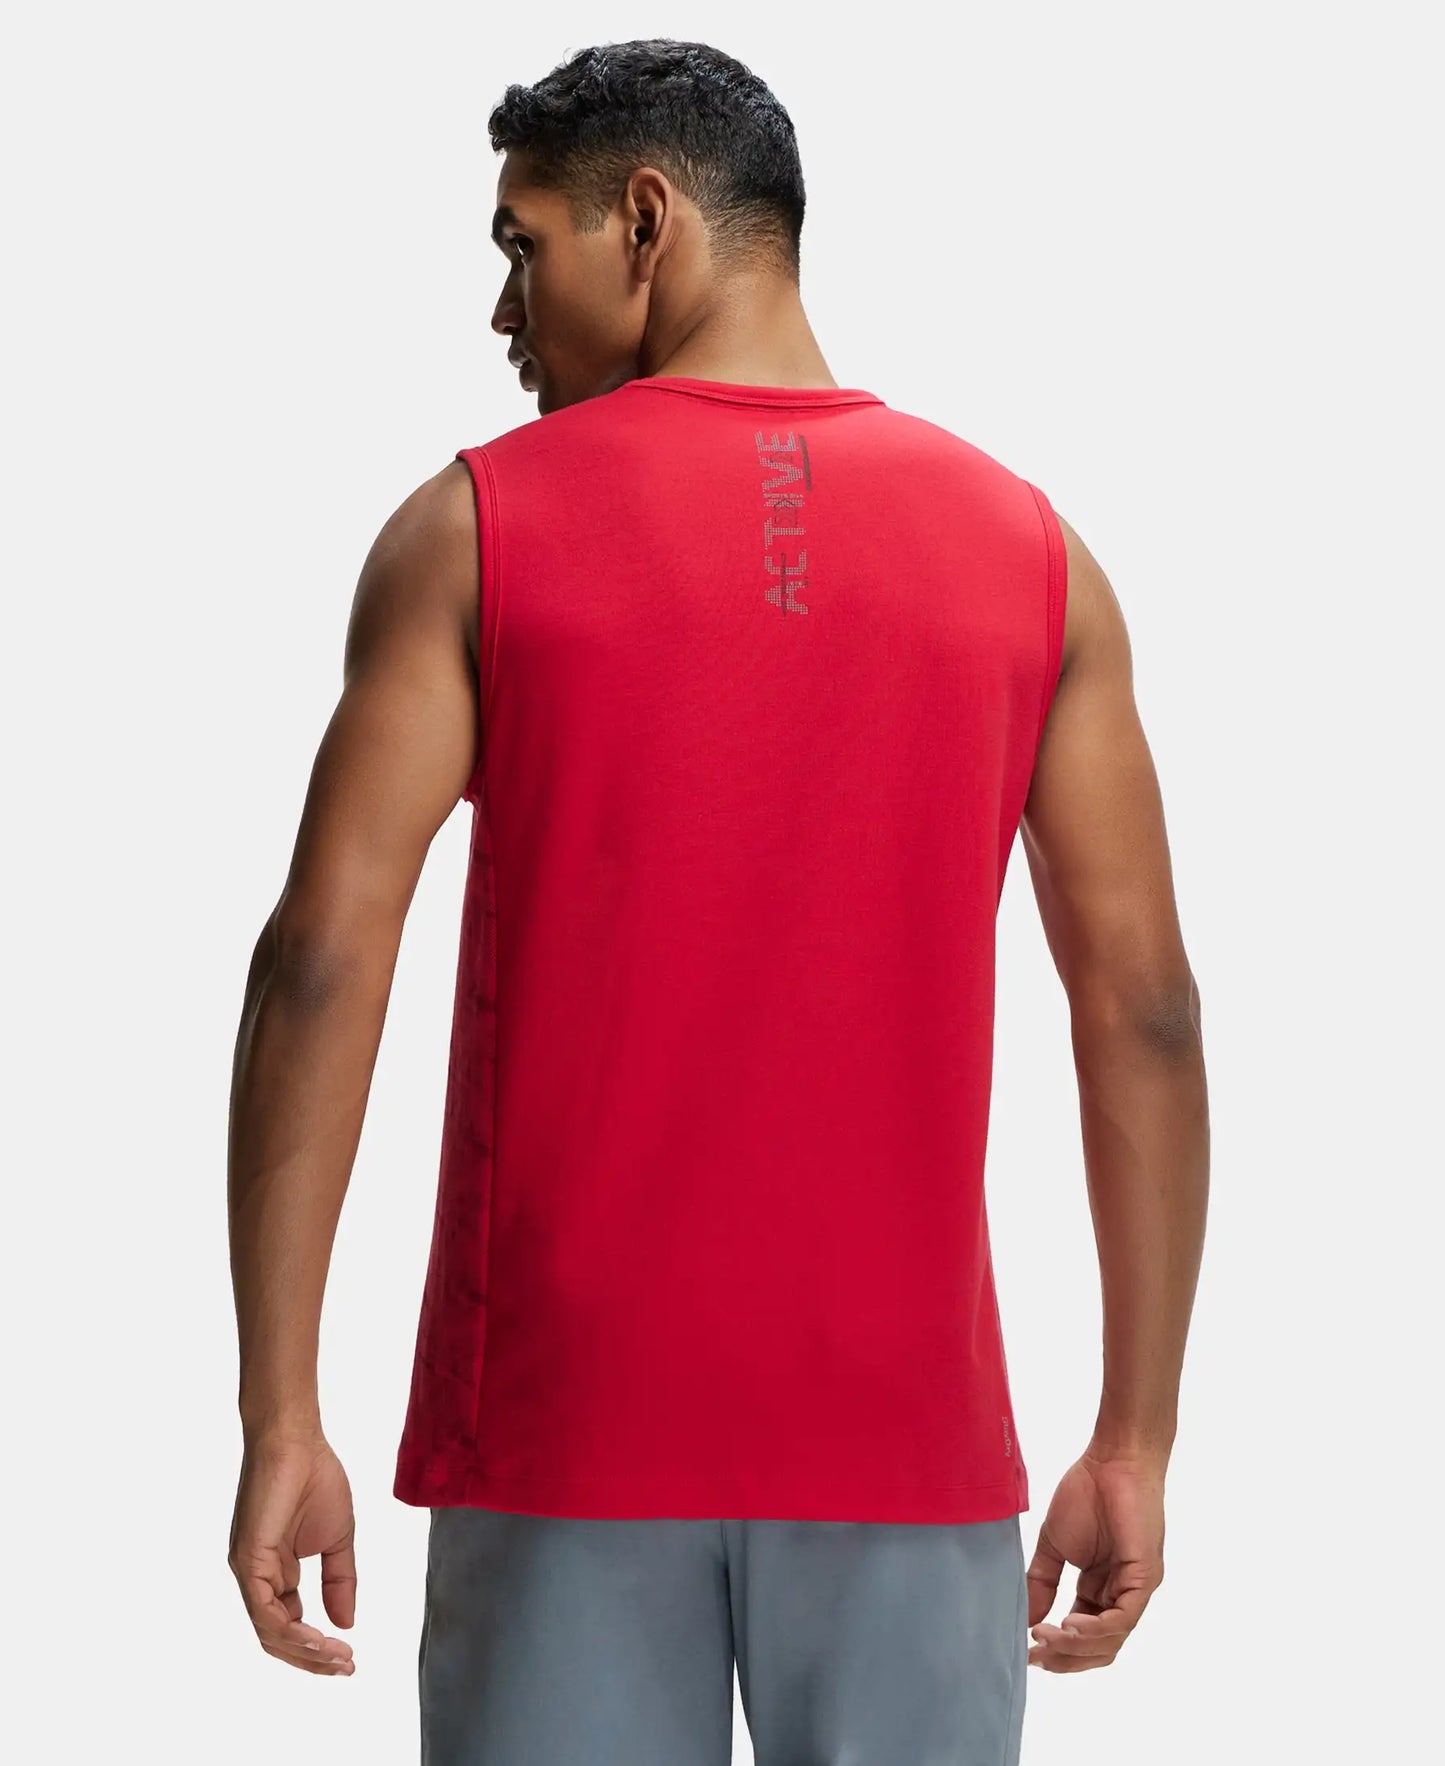 Super Combed Cotton Blend Round Neck Muscle Tee with Breathable Mesh - Team Red-3